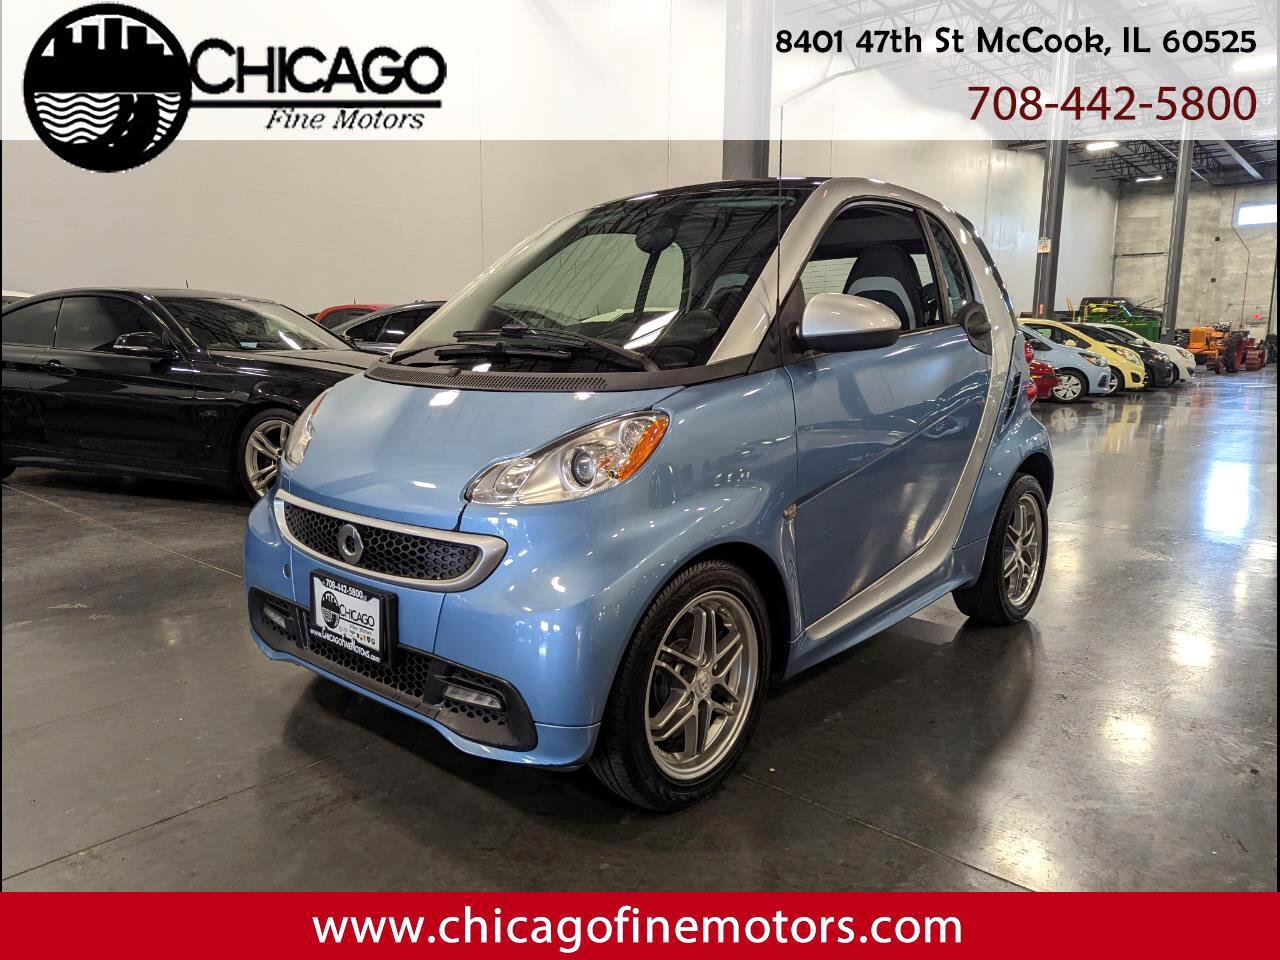 Used 2015 smart fortwo for Sale Right Now - Autotrader